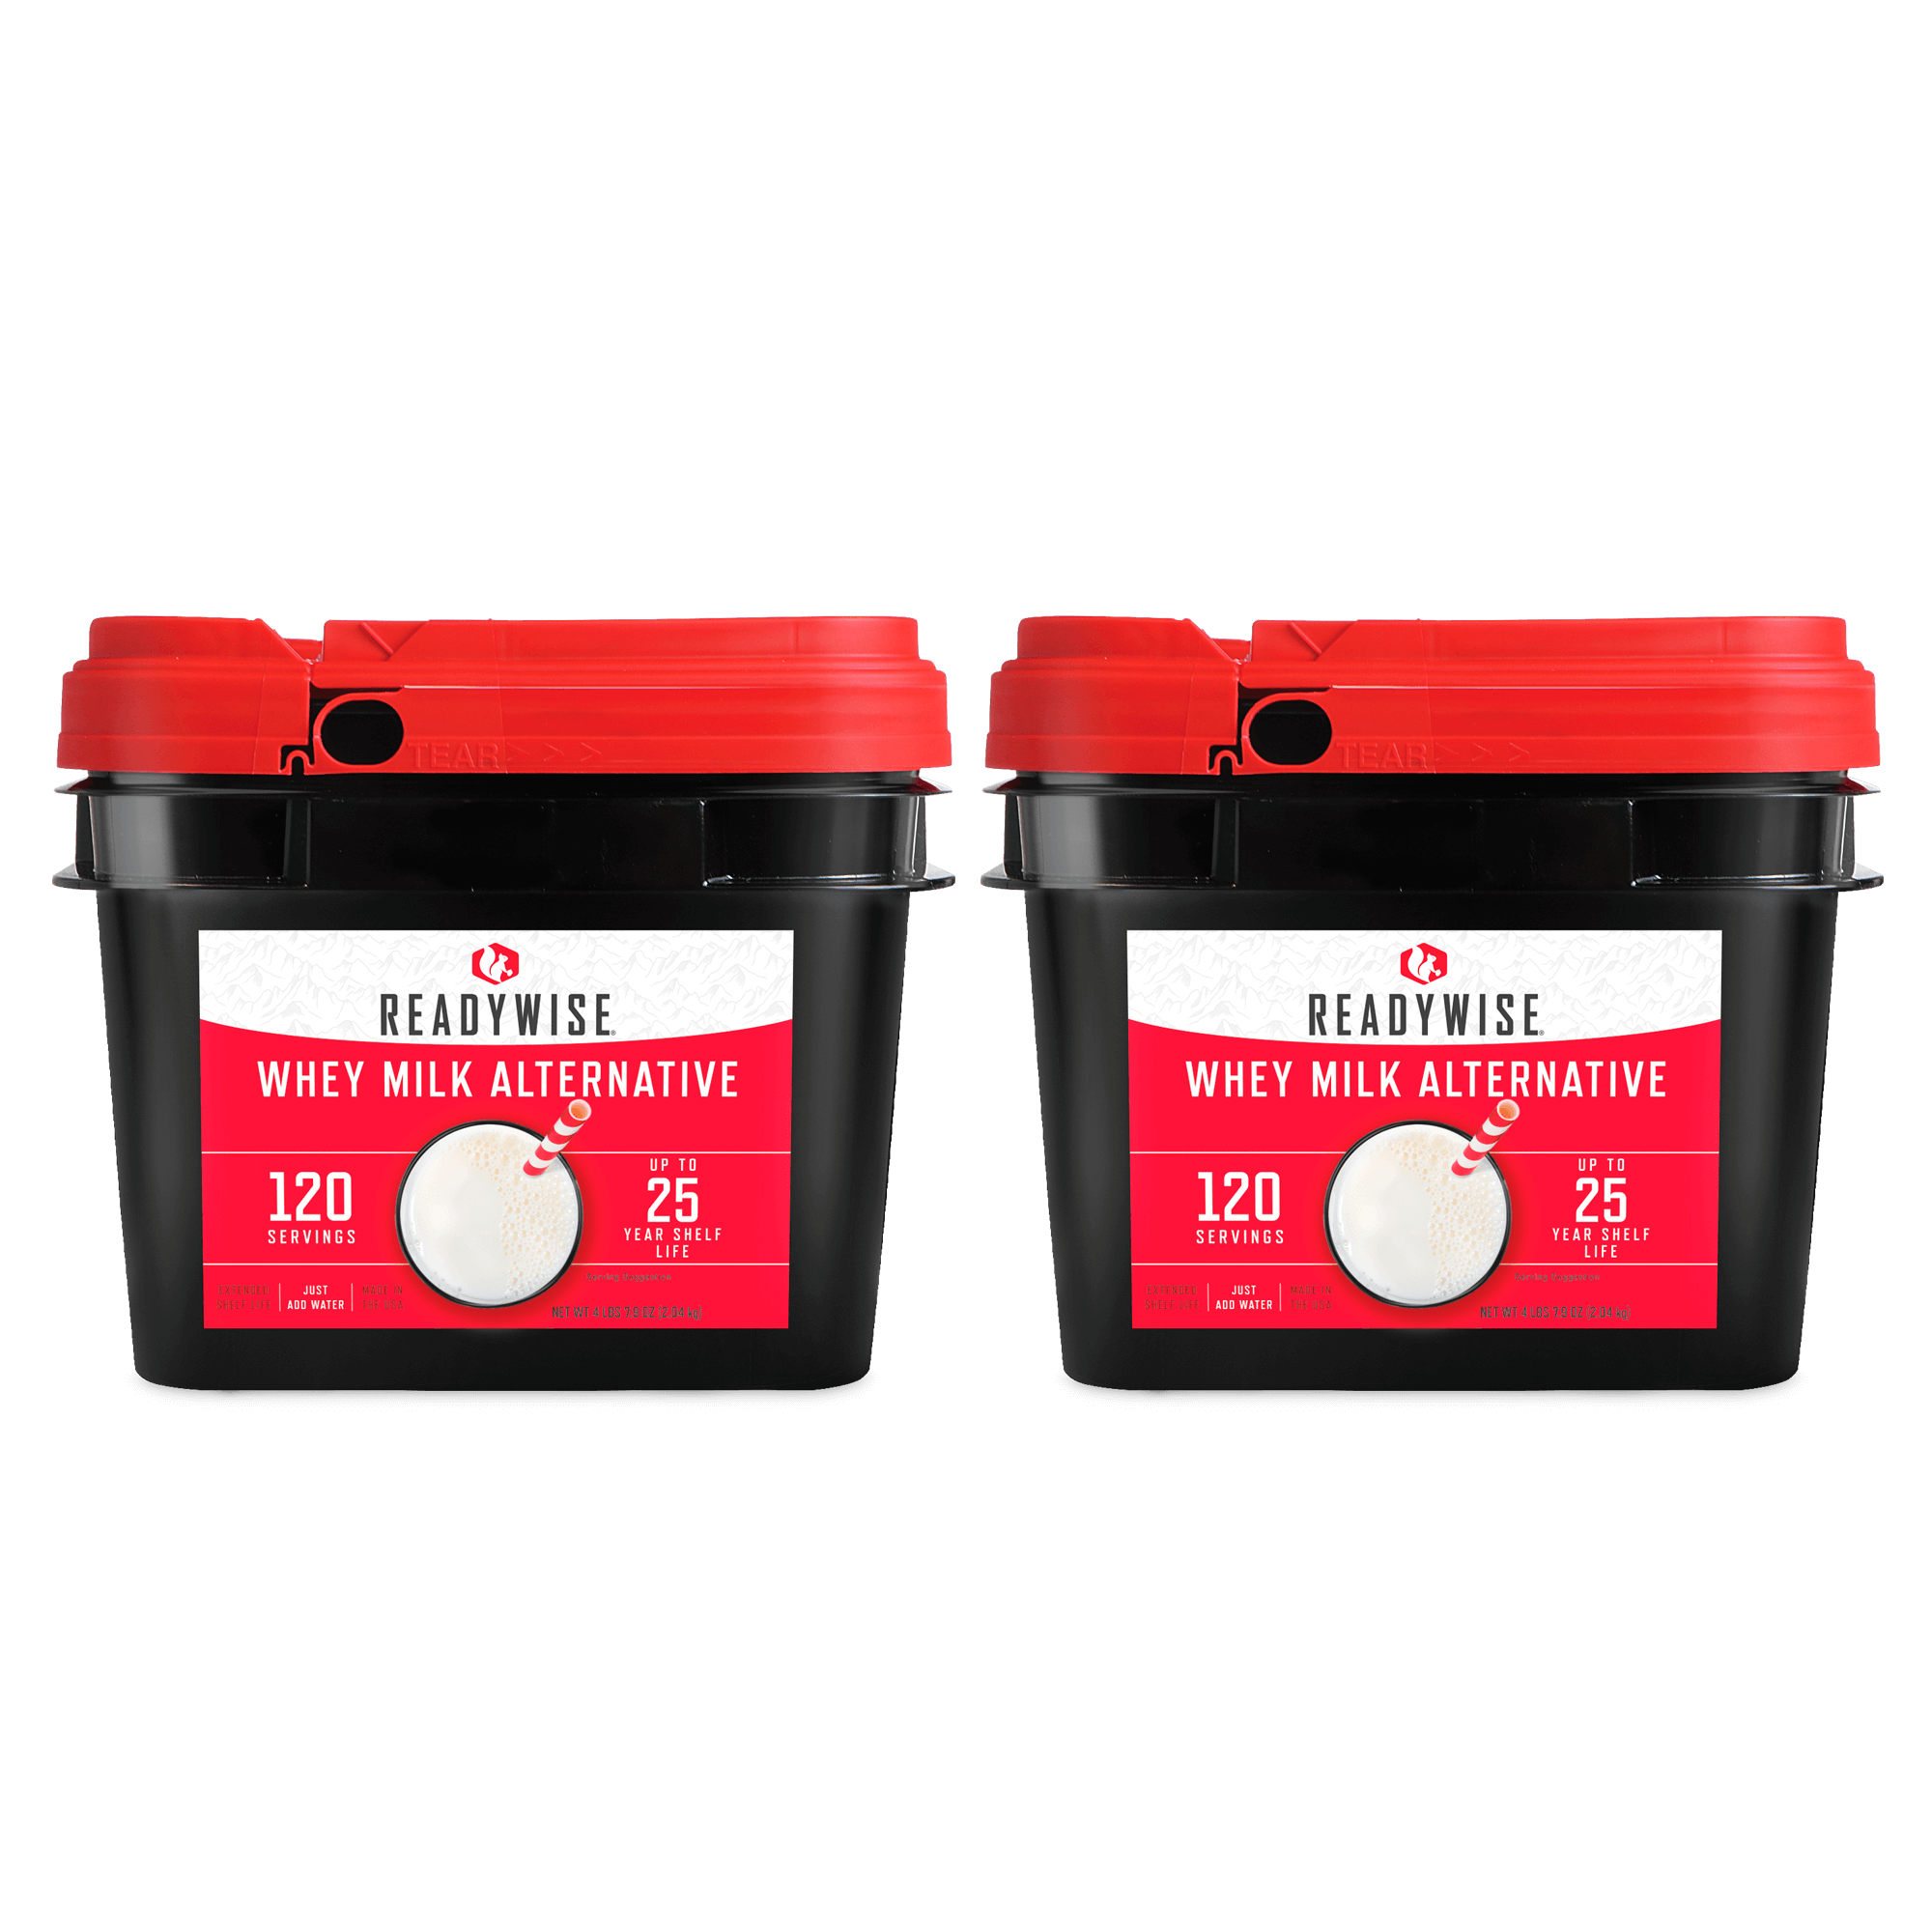 Two ReadyWise (formerly Wise Food Storage) 240 Serving Milk Buckets with red lids on a black background.